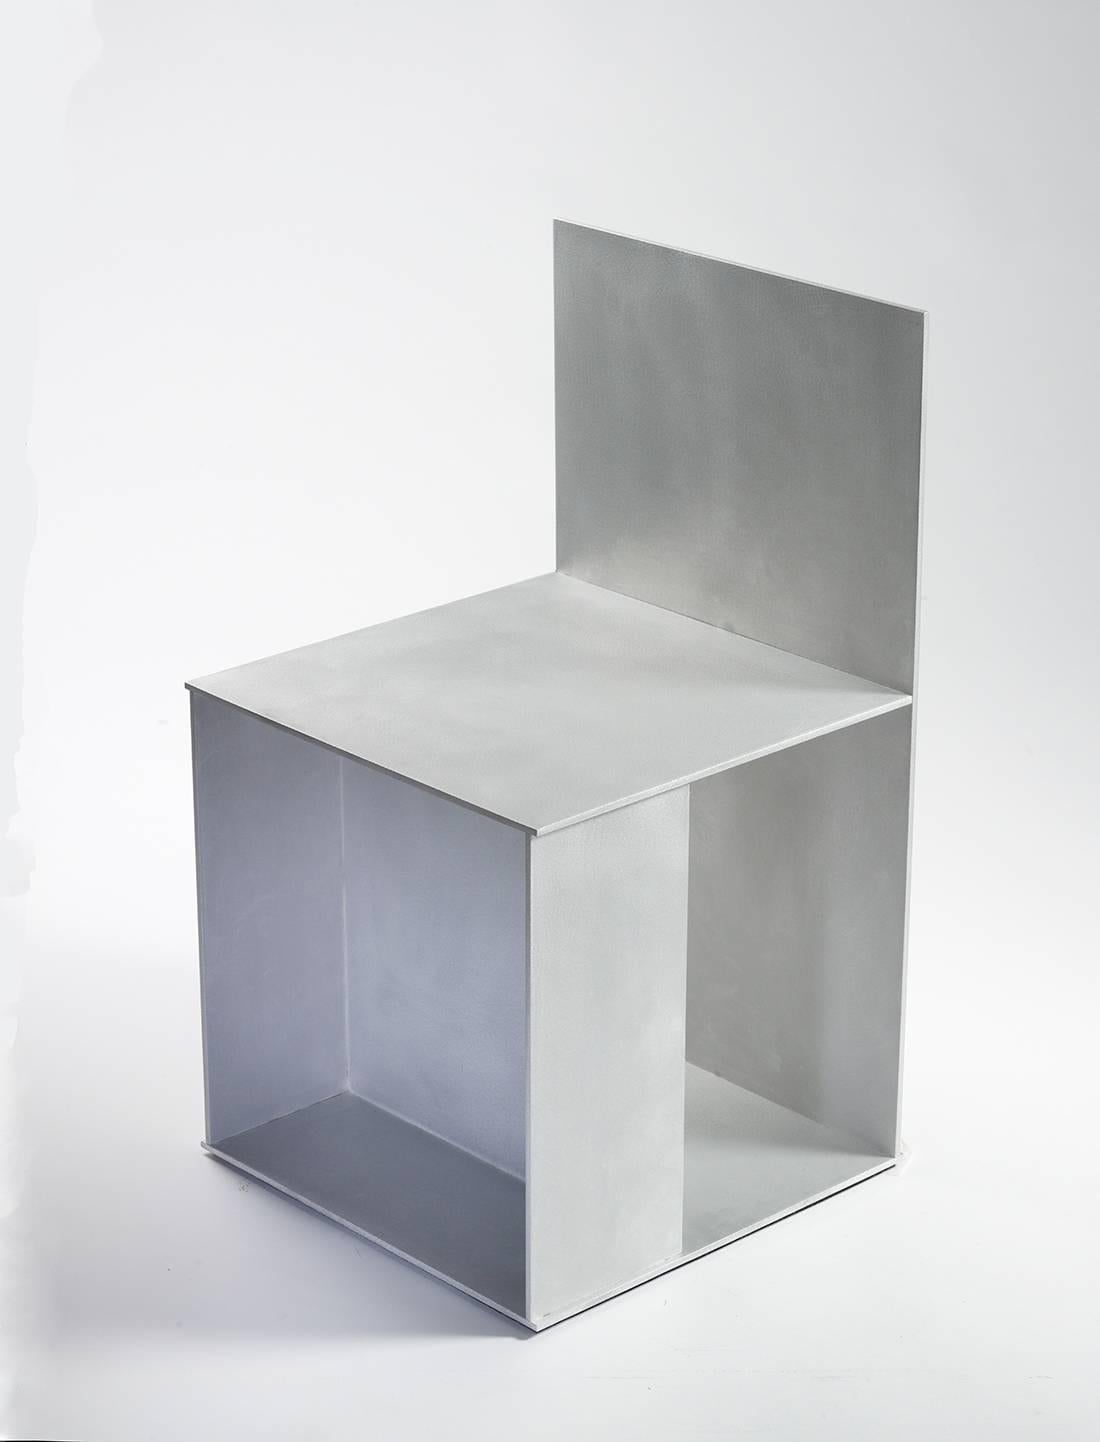 Minimalist side chair in .25 inch thick aluminium plate, part of solo nine variations at Mondo Cane Gallery in 2011. Digitally cut aluminium plates intersect and are fused with recessed welds that are ground smooth. Plates are hand finished and